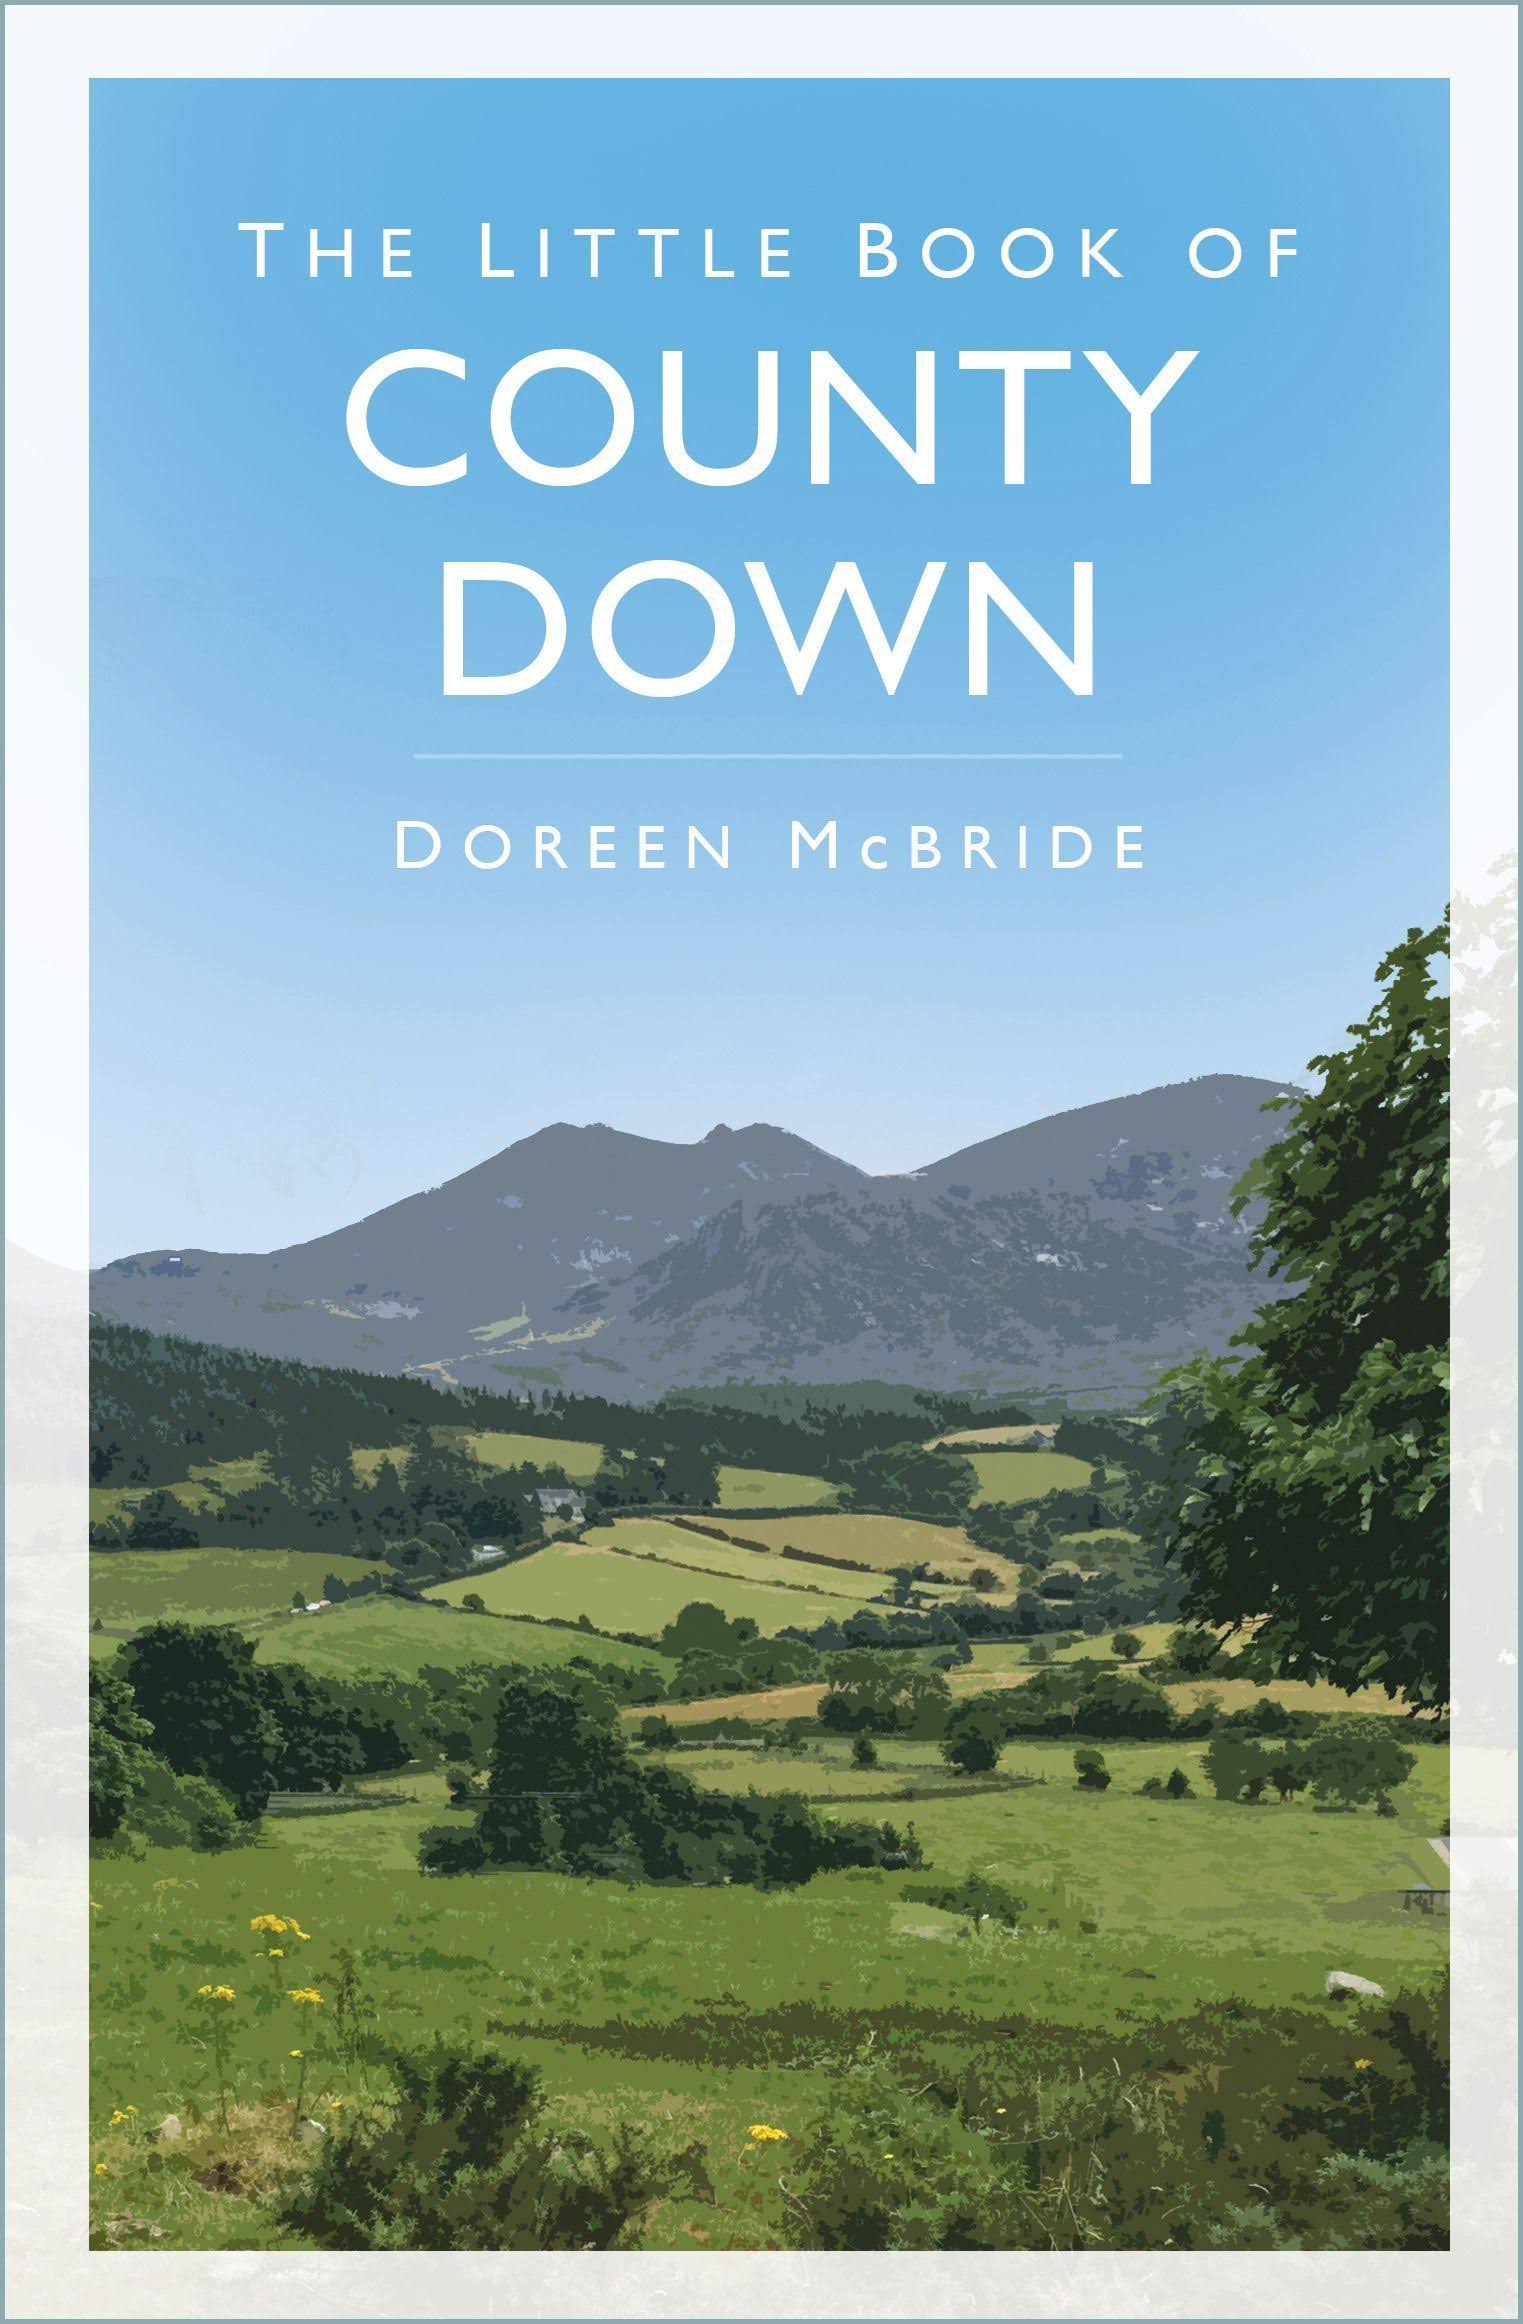 The Little Book of County Down [Book]